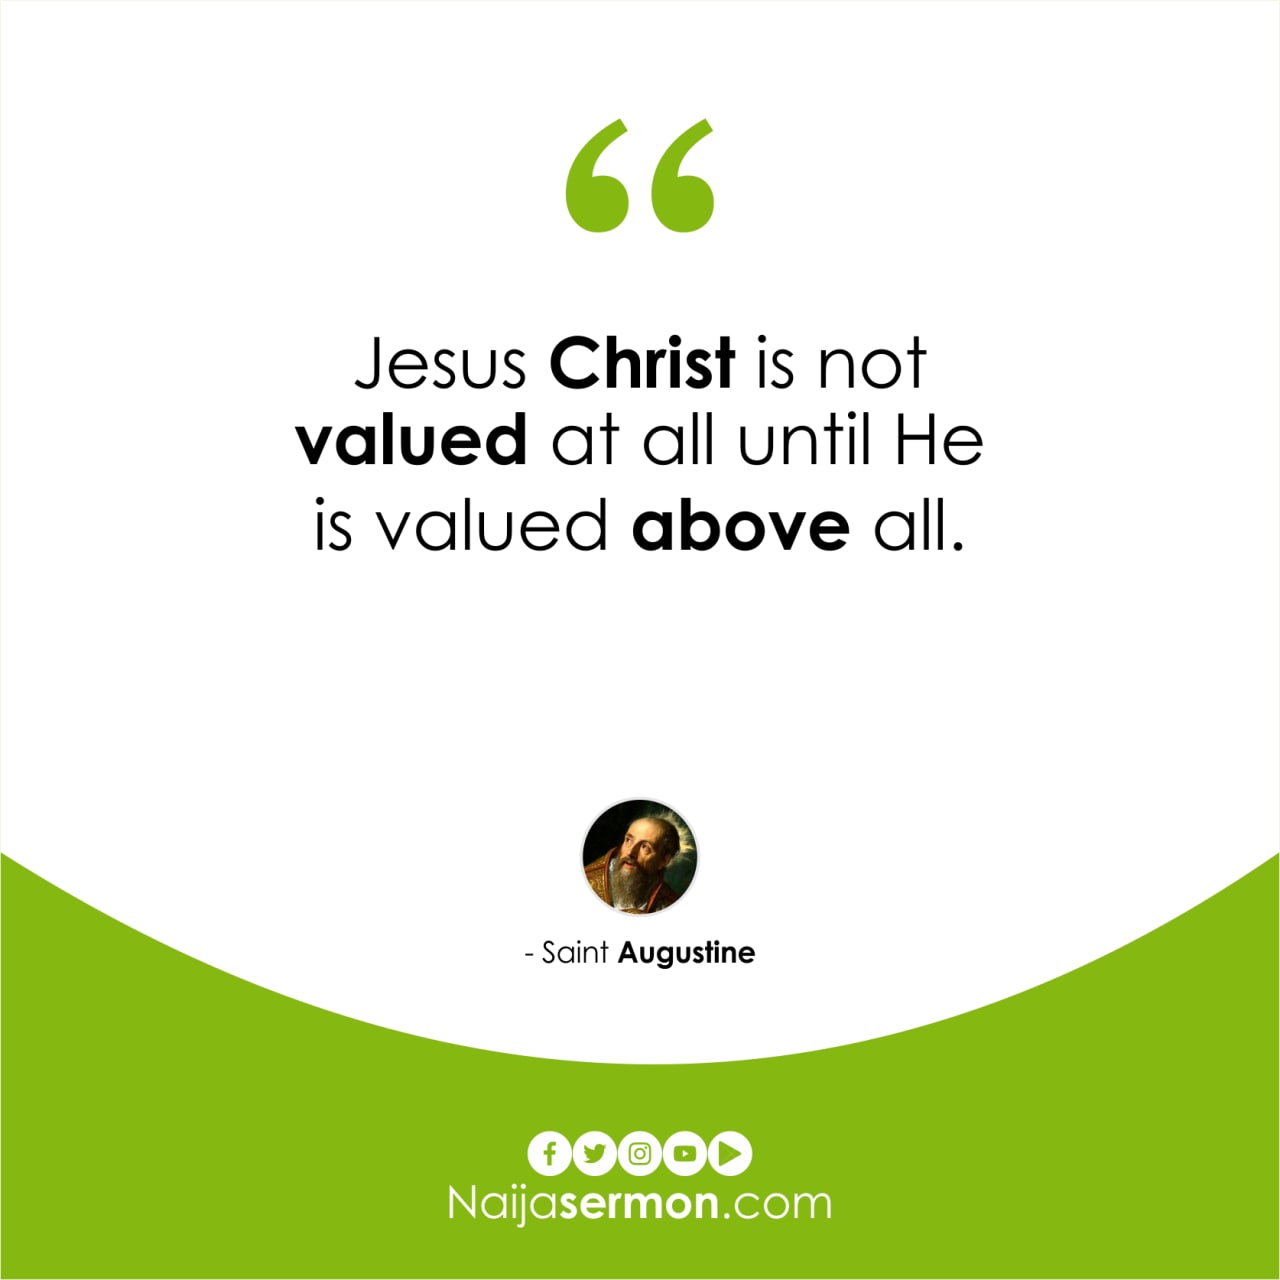 QUOTE OF THE DAY BY SAINT AUGUSTINE 19